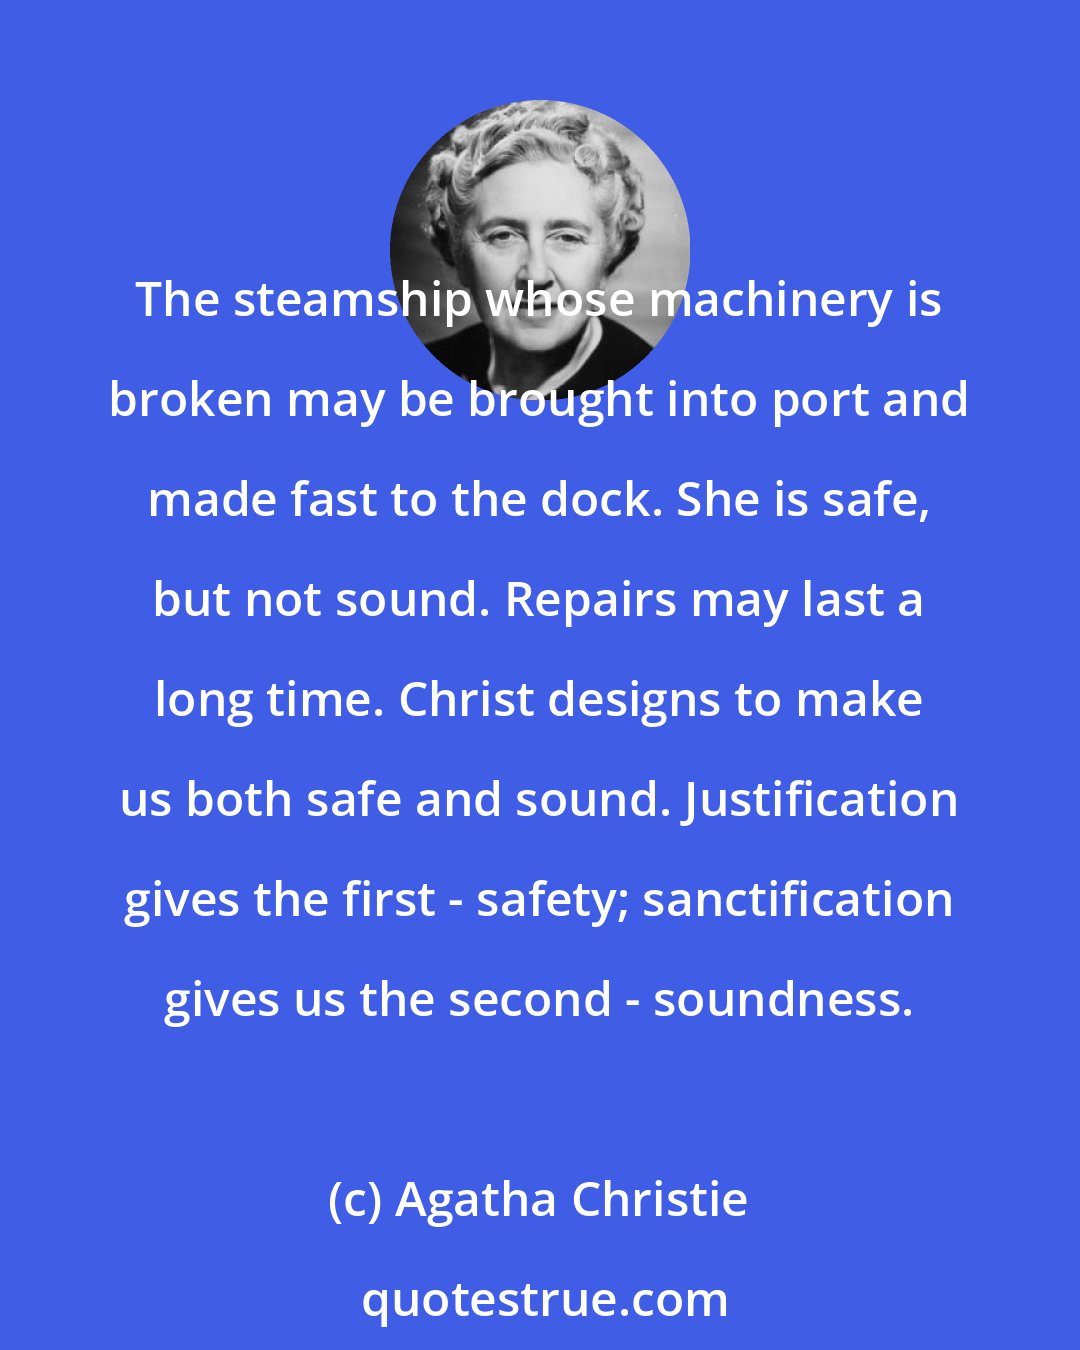 Agatha Christie: The steamship whose machinery is broken may be brought into port and made fast to the dock. She is safe, but not sound. Repairs may last a long time. Christ designs to make us both safe and sound. Justification gives the first - safety; sanctification gives us the second - soundness.